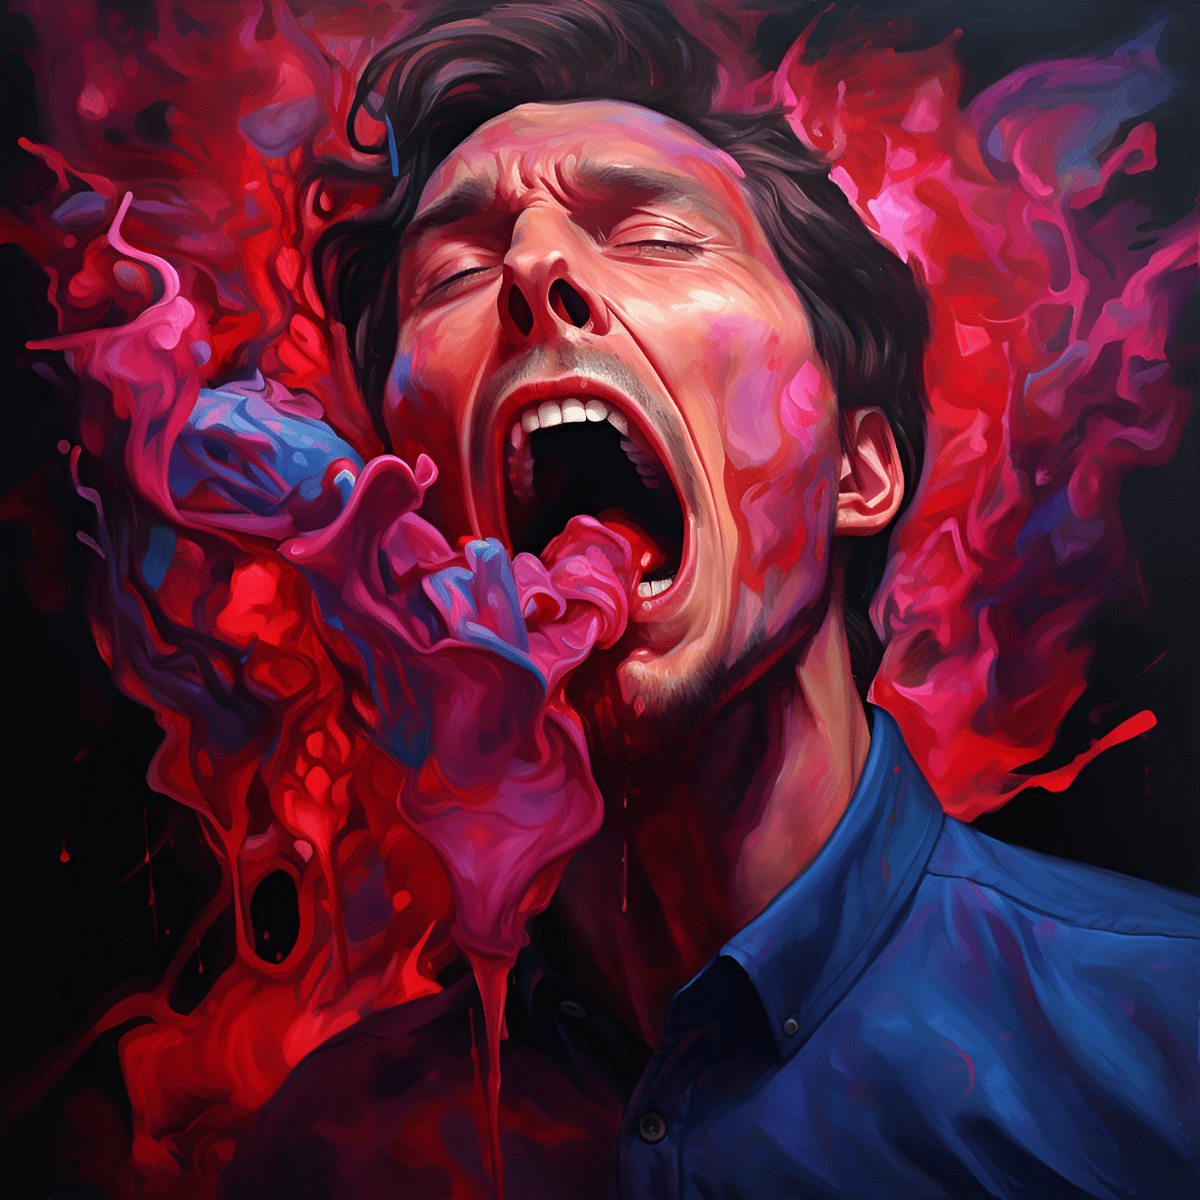 blood coming out of man's mouth